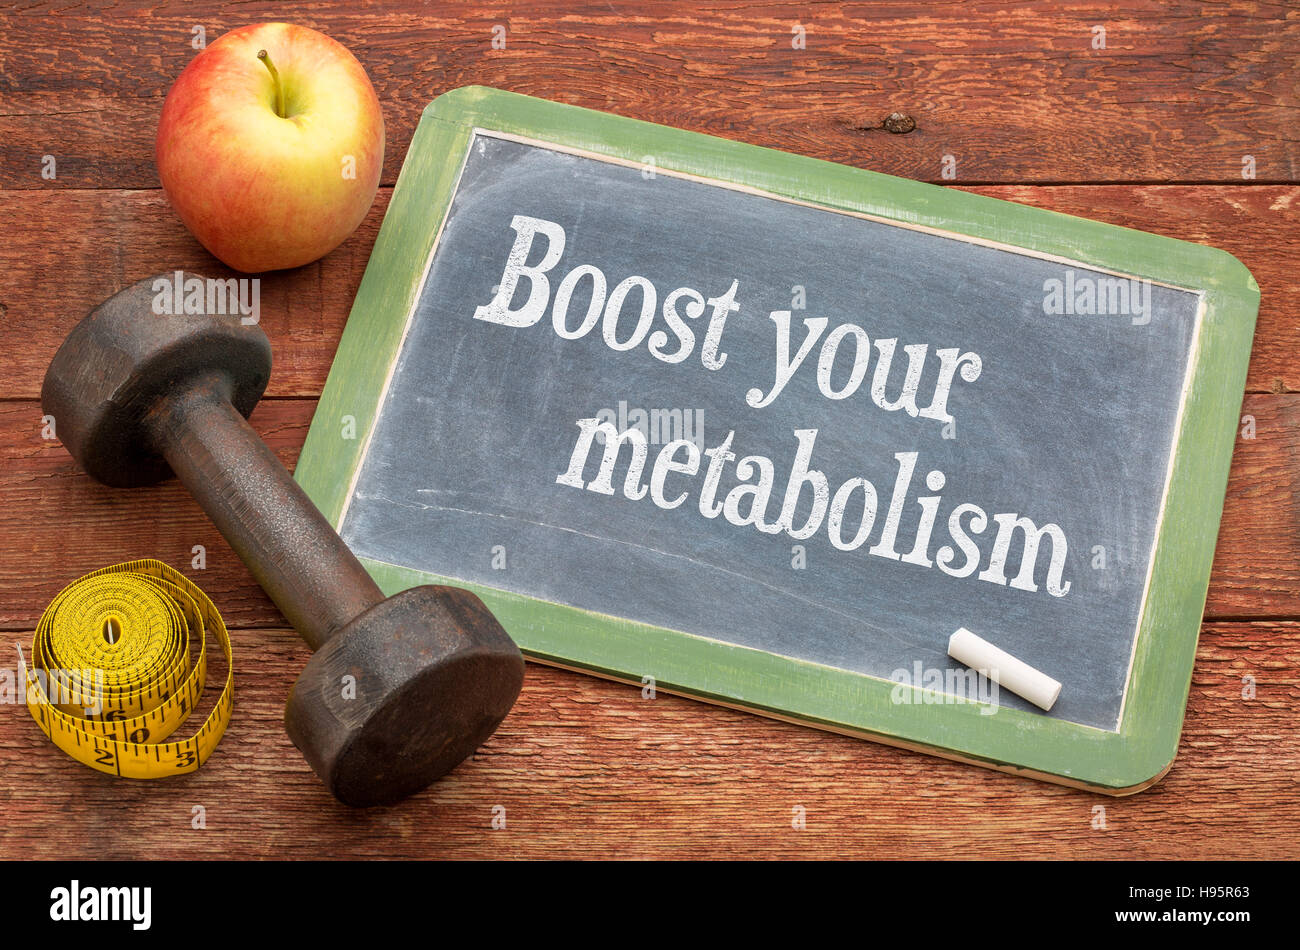 Boost your metabolism concept -  slate blackboard sign against weathered red painted barn wood with a dumbbell, apple and tape measure Stock Photo